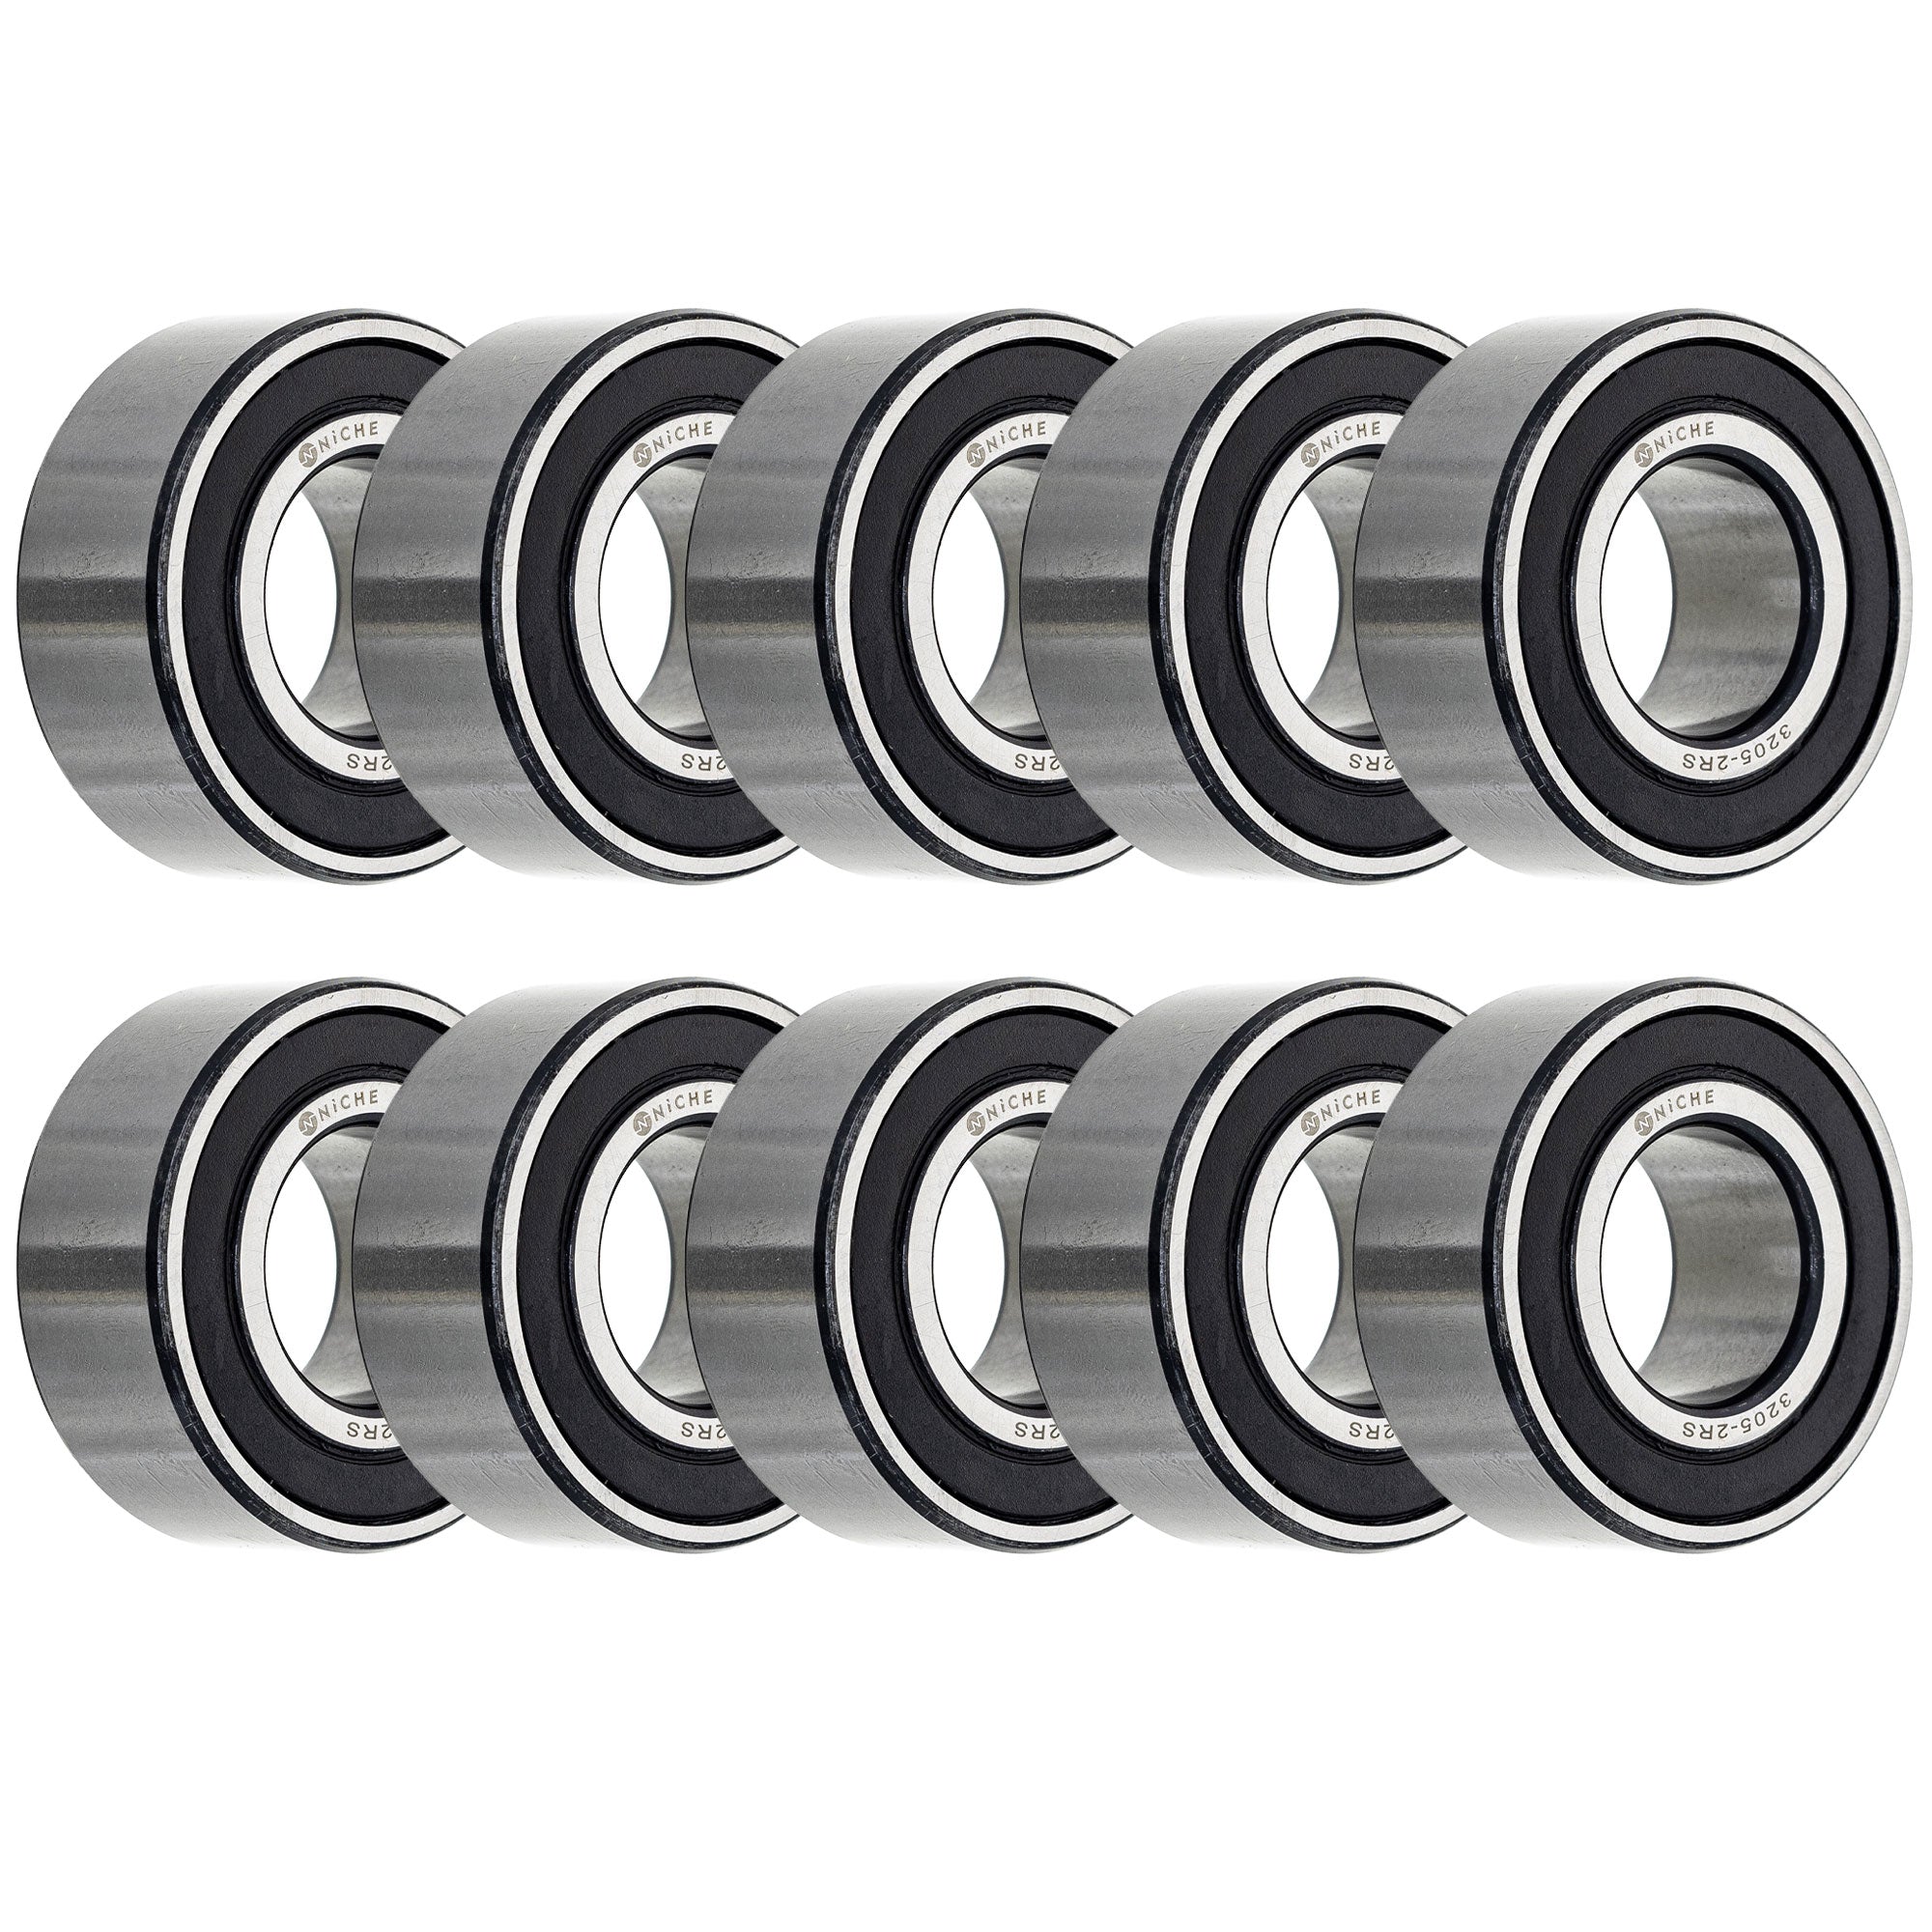 Double Row, Angular Contact, Ball Bearing Pack of 10 10-Pack for zOTHER R850R R1150GS NICHE 519-CBB2284R